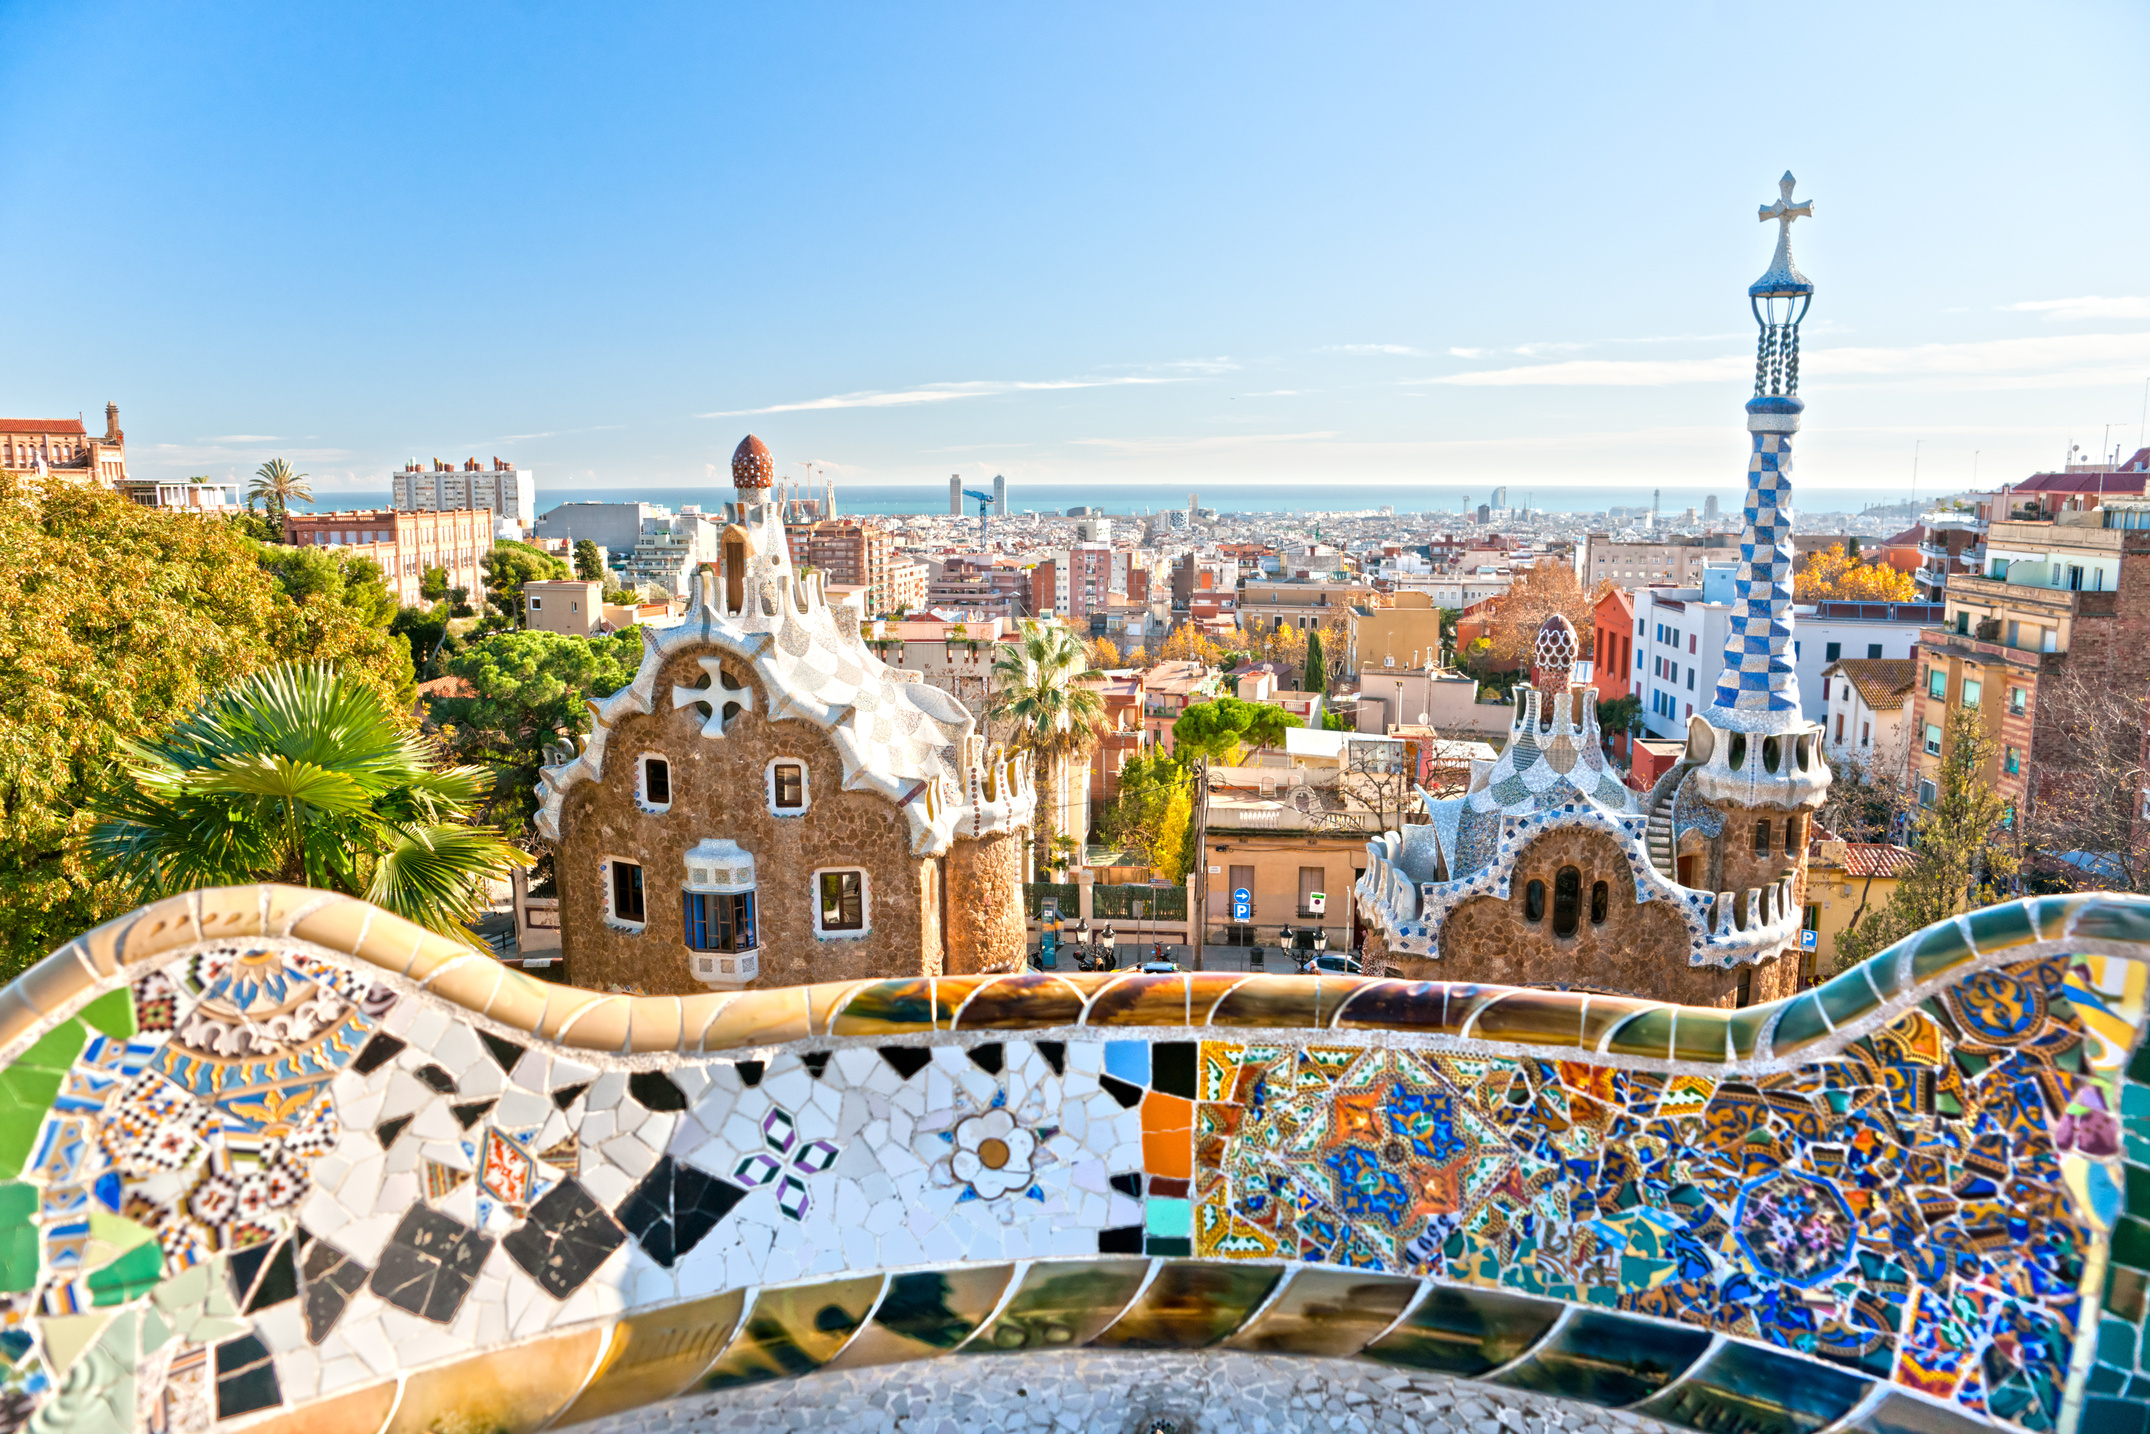 Gaudi's Parc Guell in Barcelona